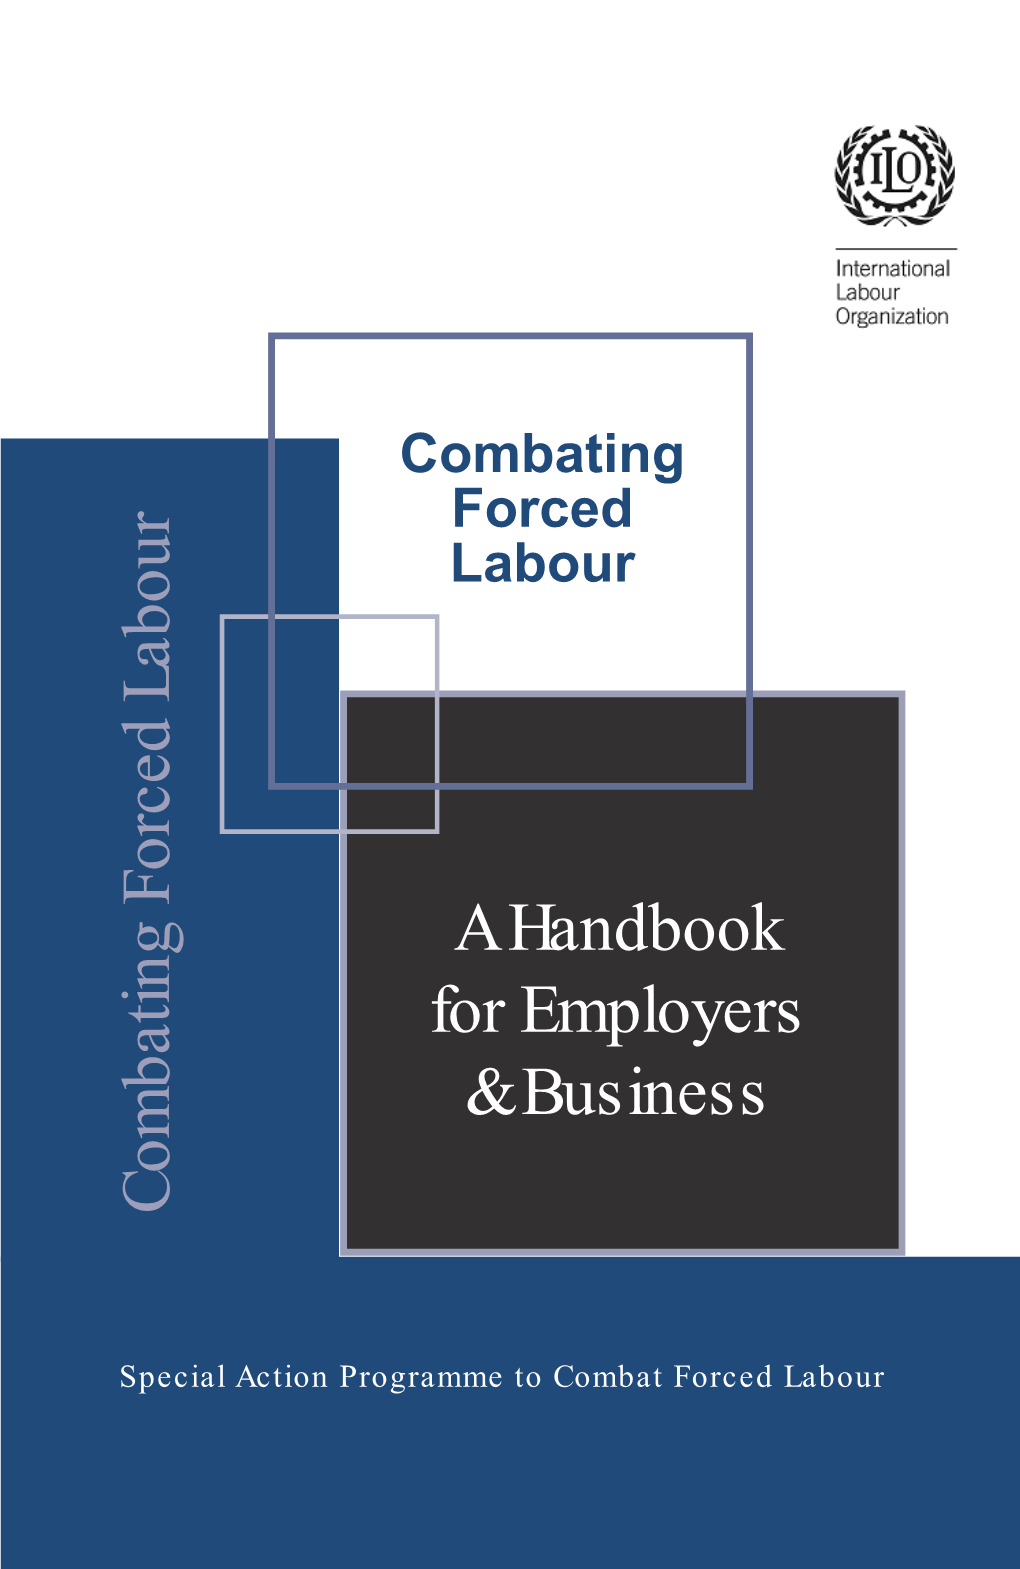 A Handbook for Employers & Business Combating Forced Labour